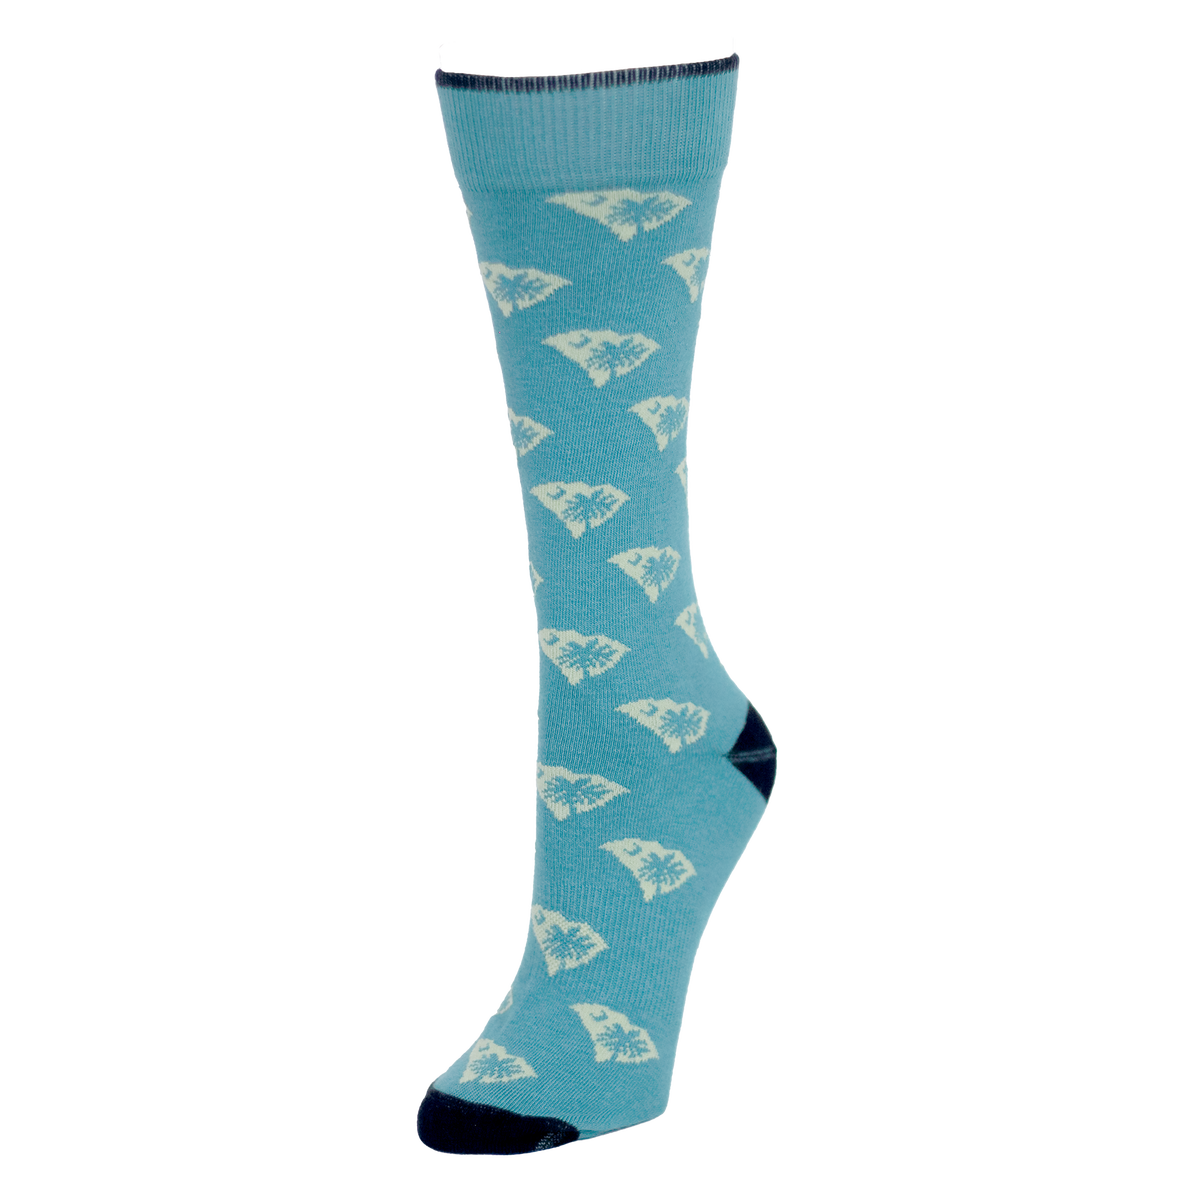 Palmetto Tree and State Socks - Teal